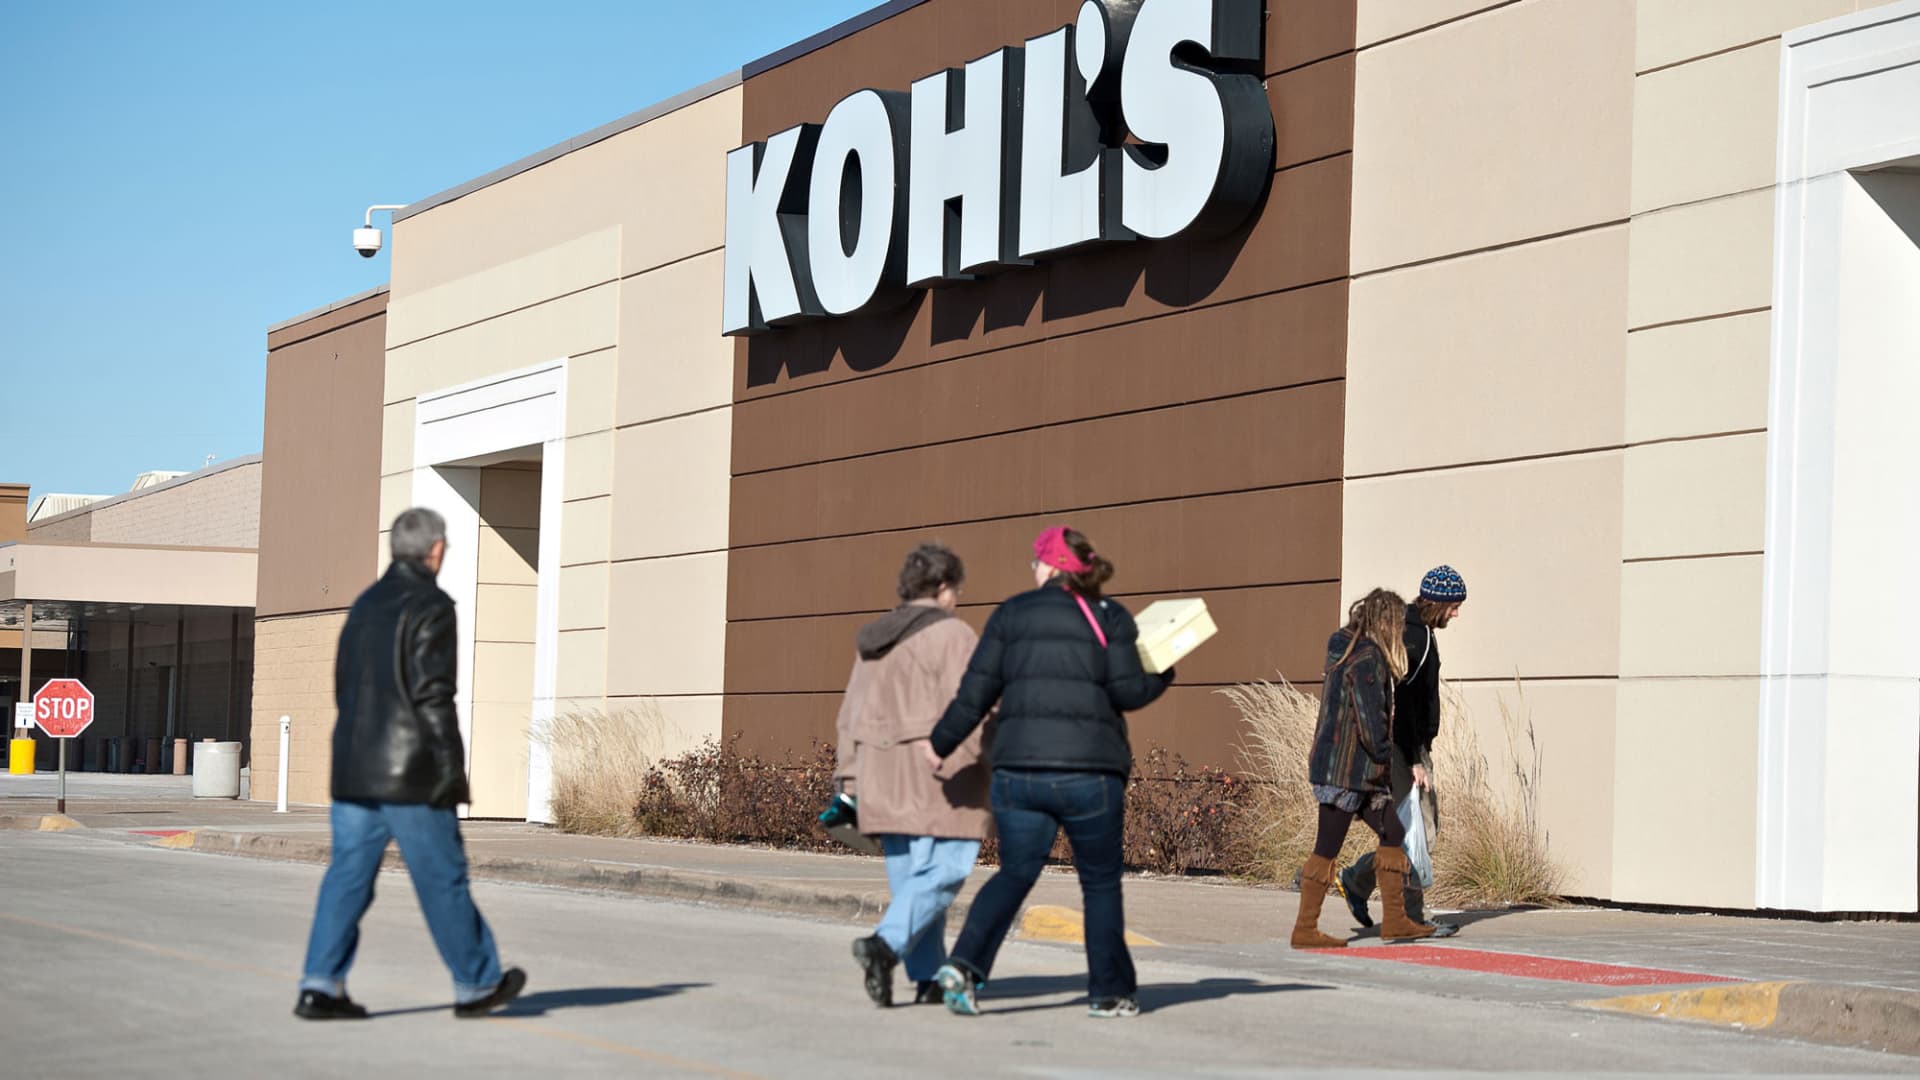 Here’s why Vitamin Shoppe’s owner wants to buy Kohl’s – and what could happen next – CNBC